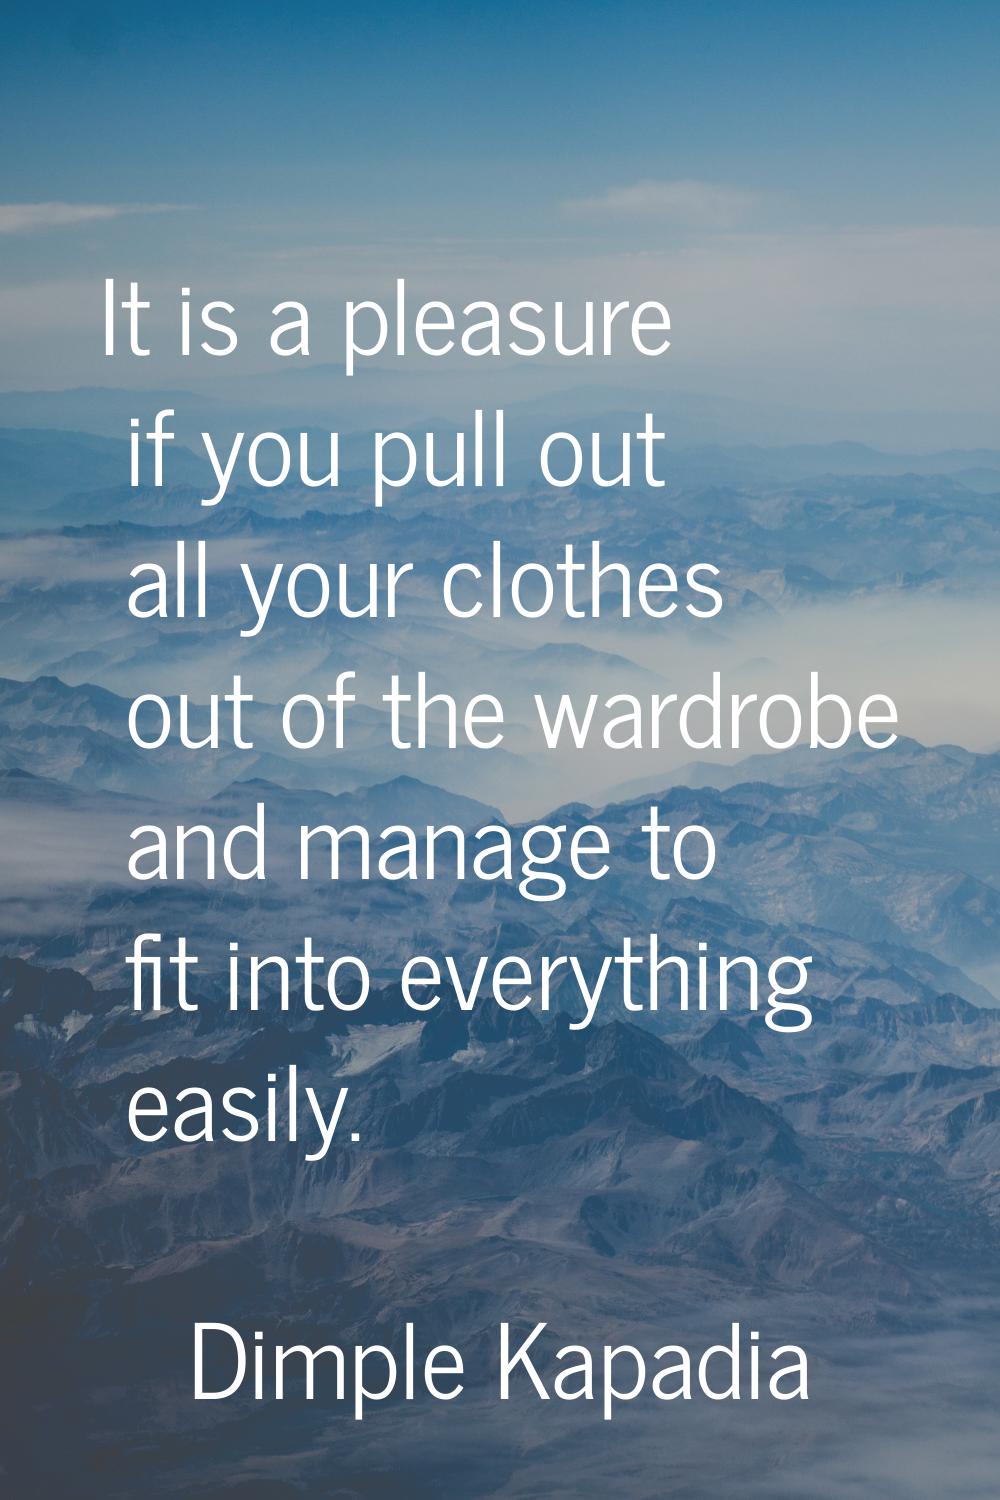 It is a pleasure if you pull out all your clothes out of the wardrobe and manage to fit into everyt